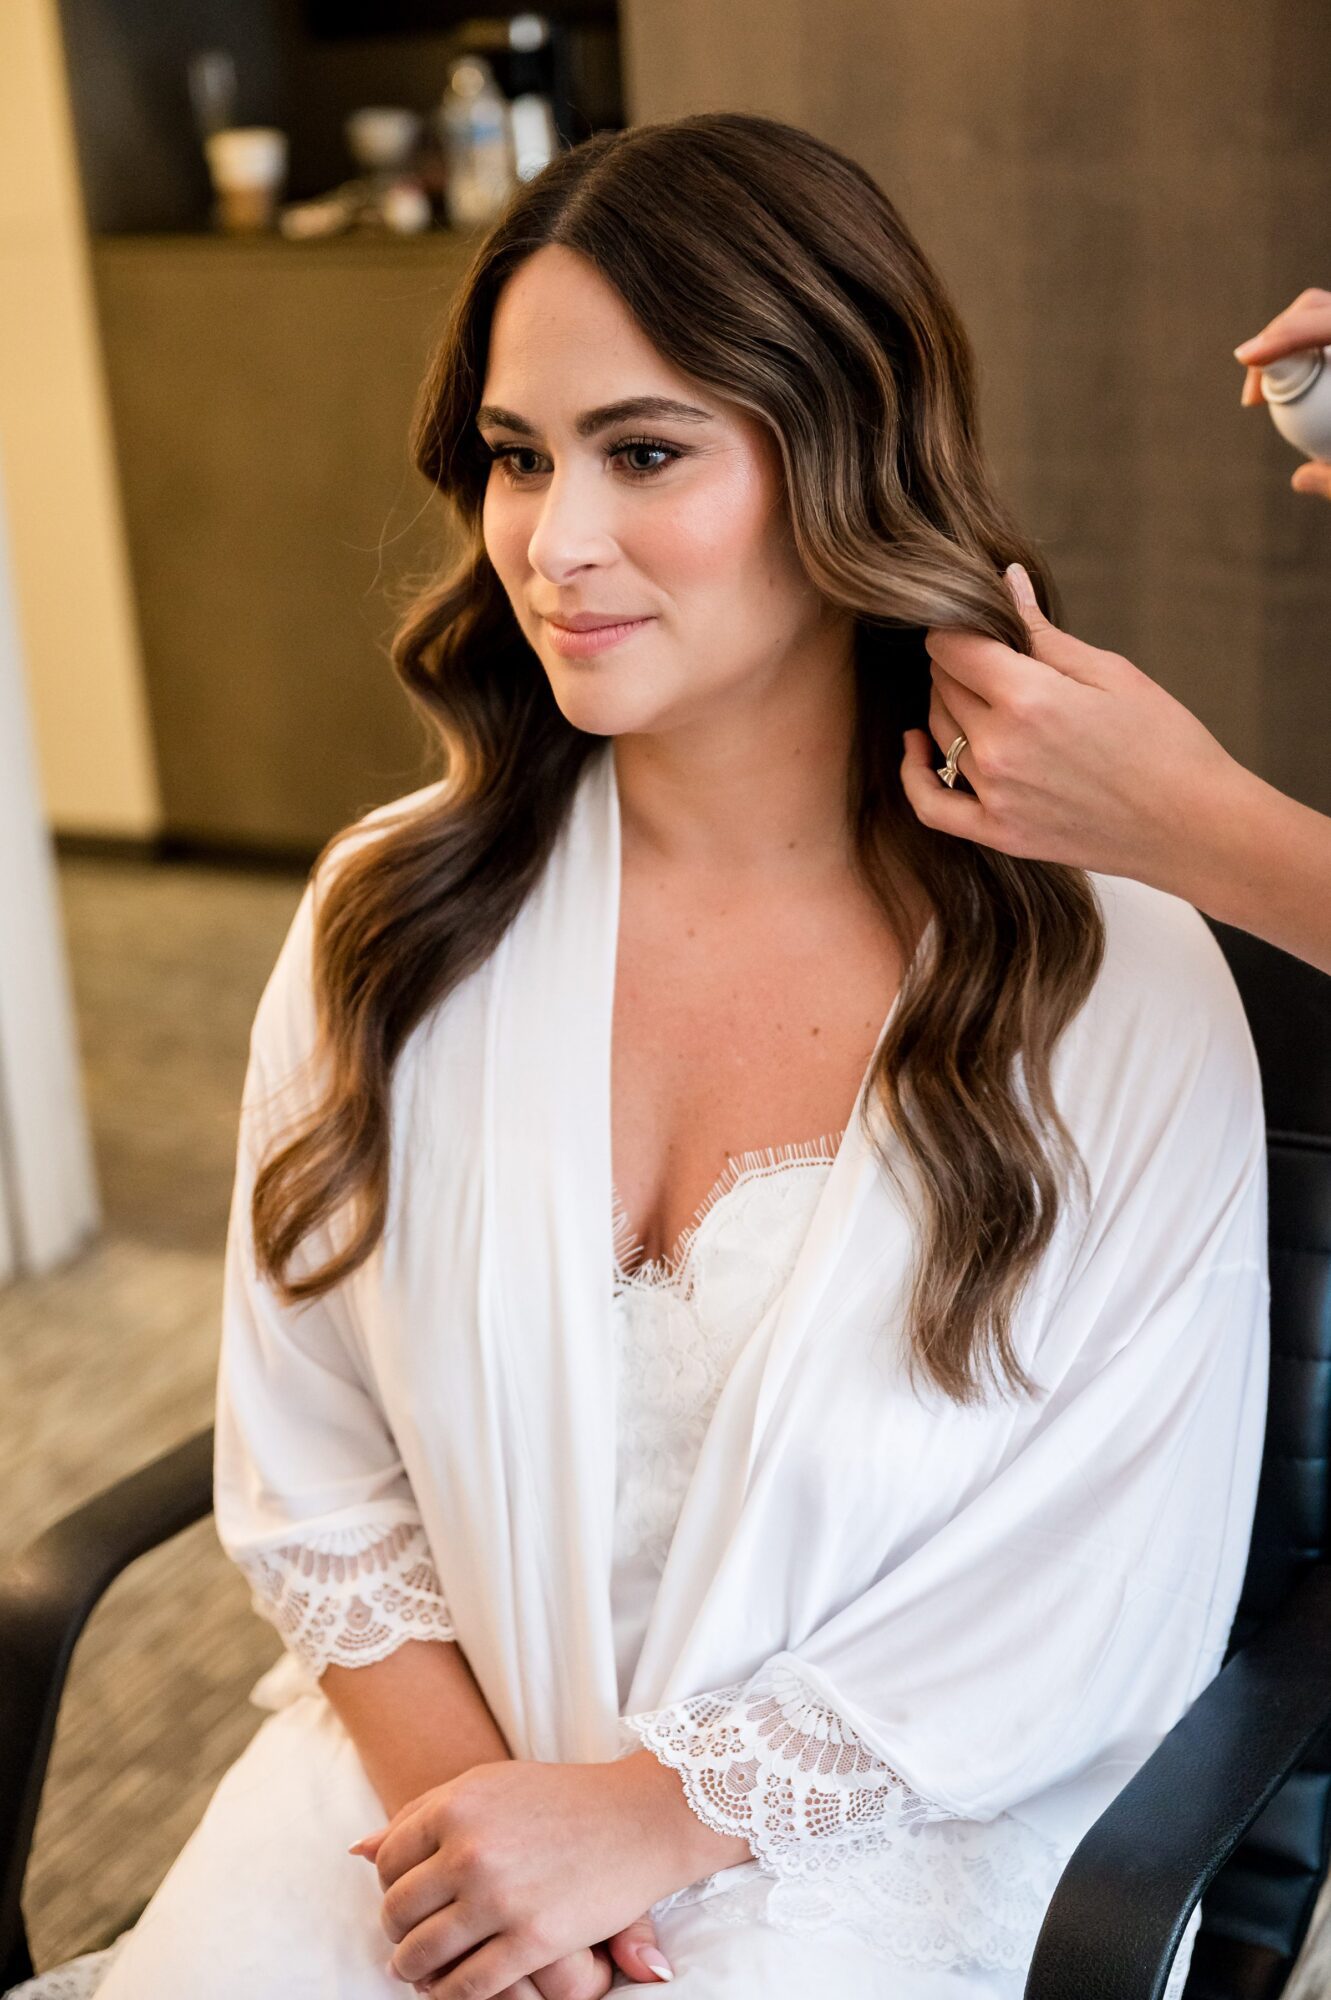 A bride getting her hair done in a robe.